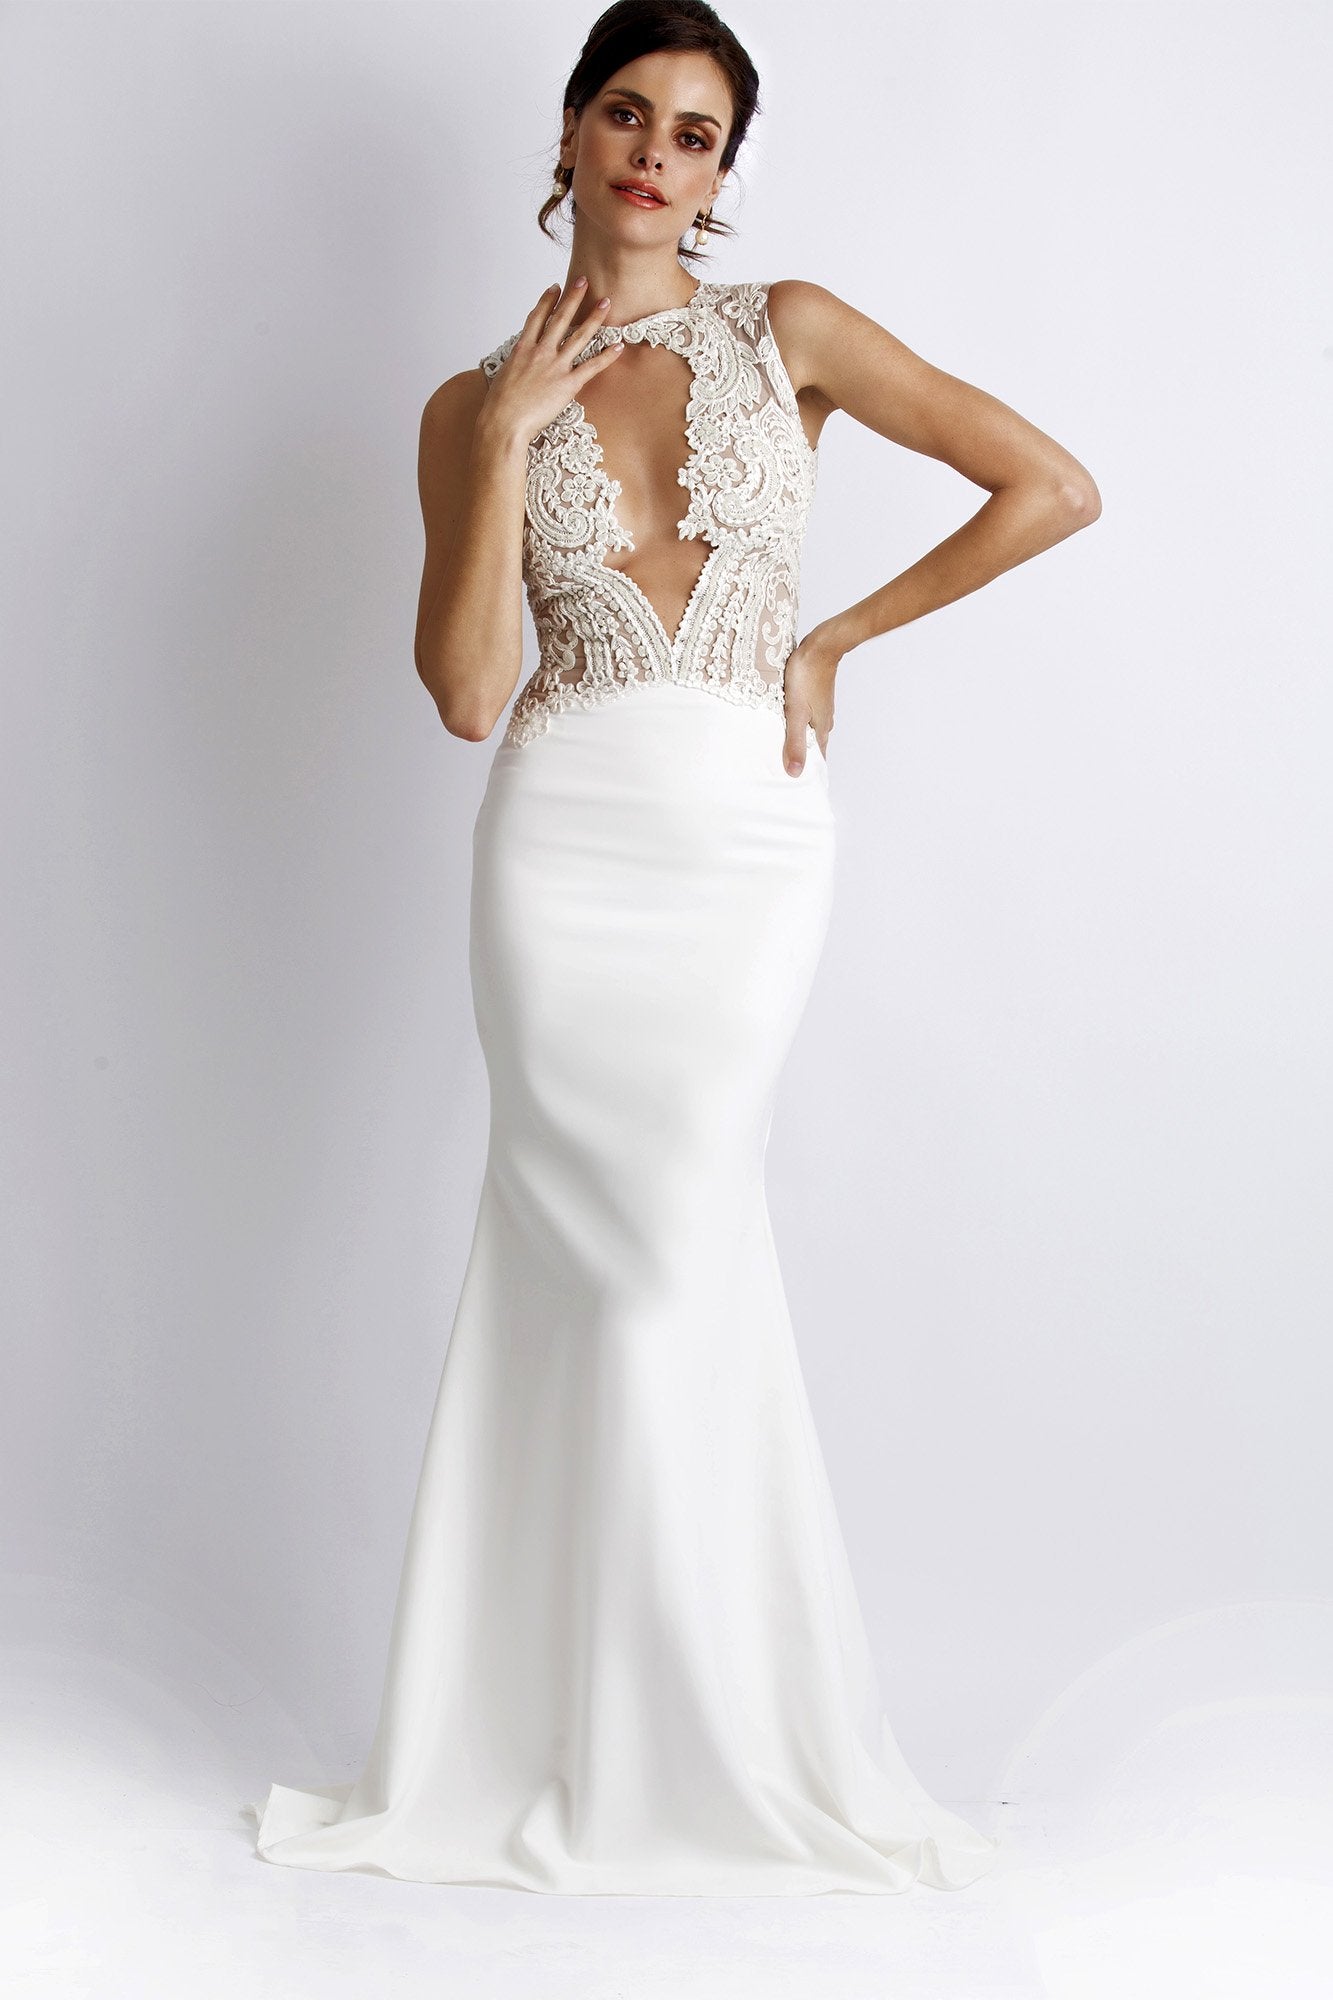 white jersey gown